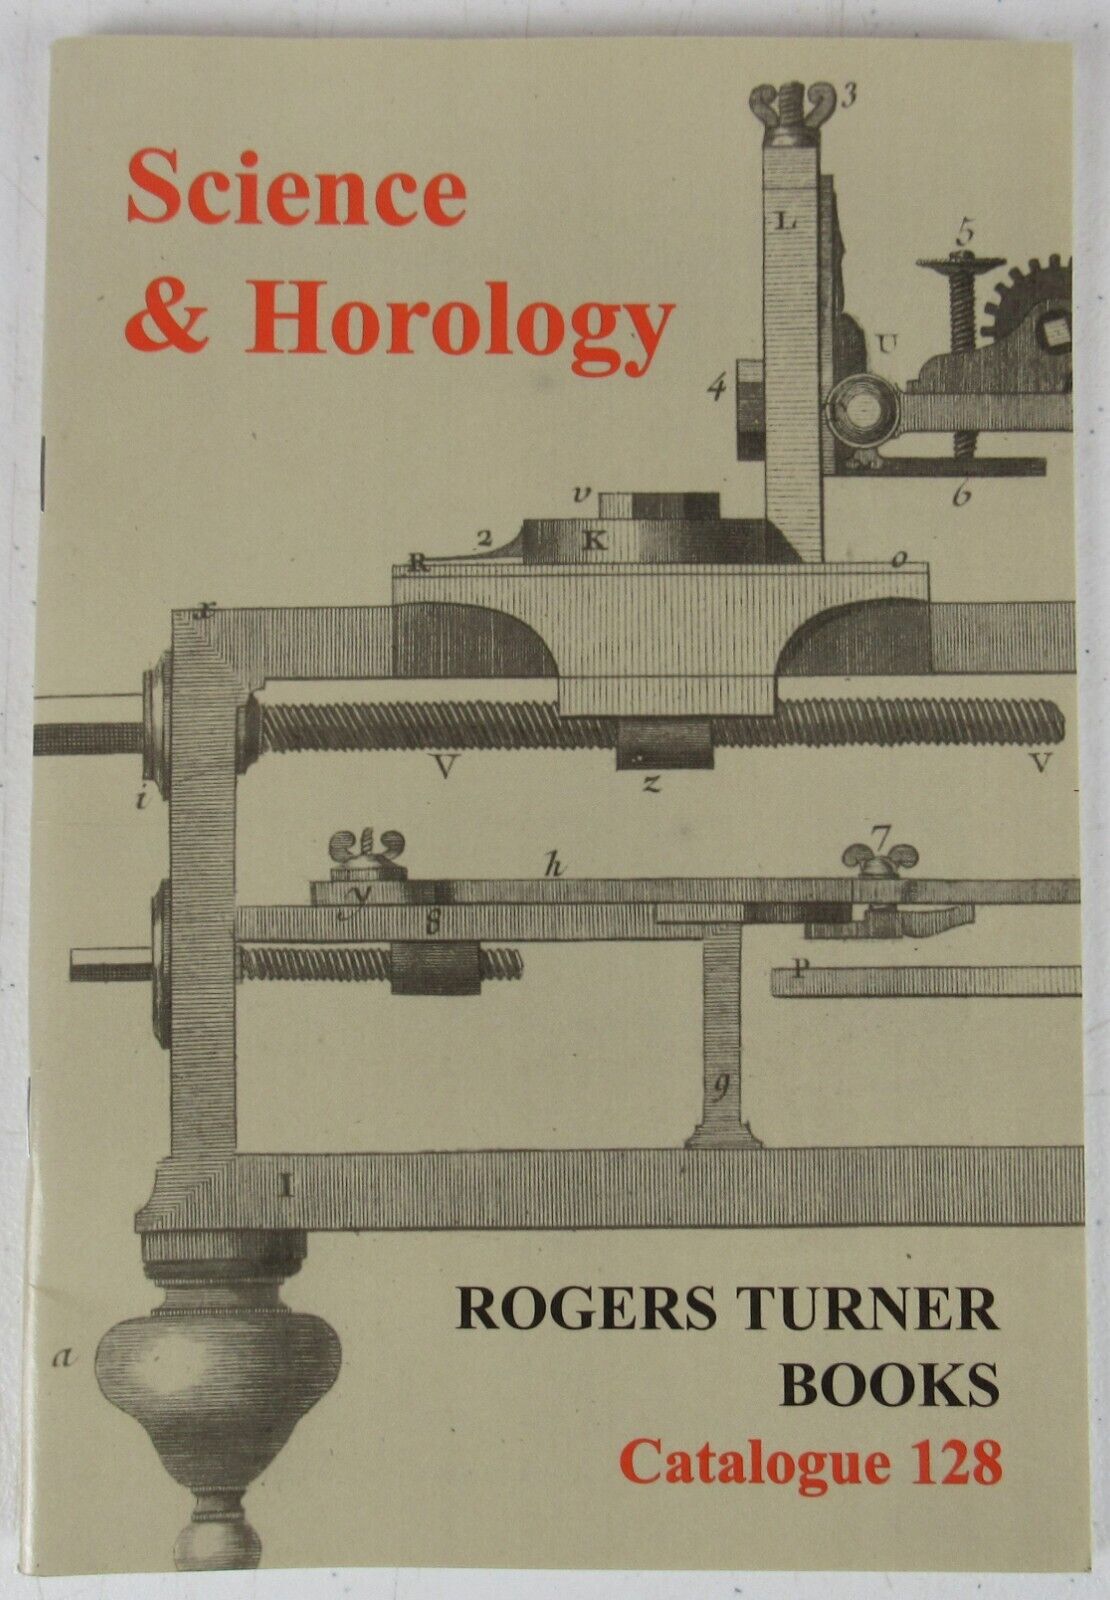 Science & Horology Rogers Turner Books Catalog 128 Clocks Watches Booklet 2003